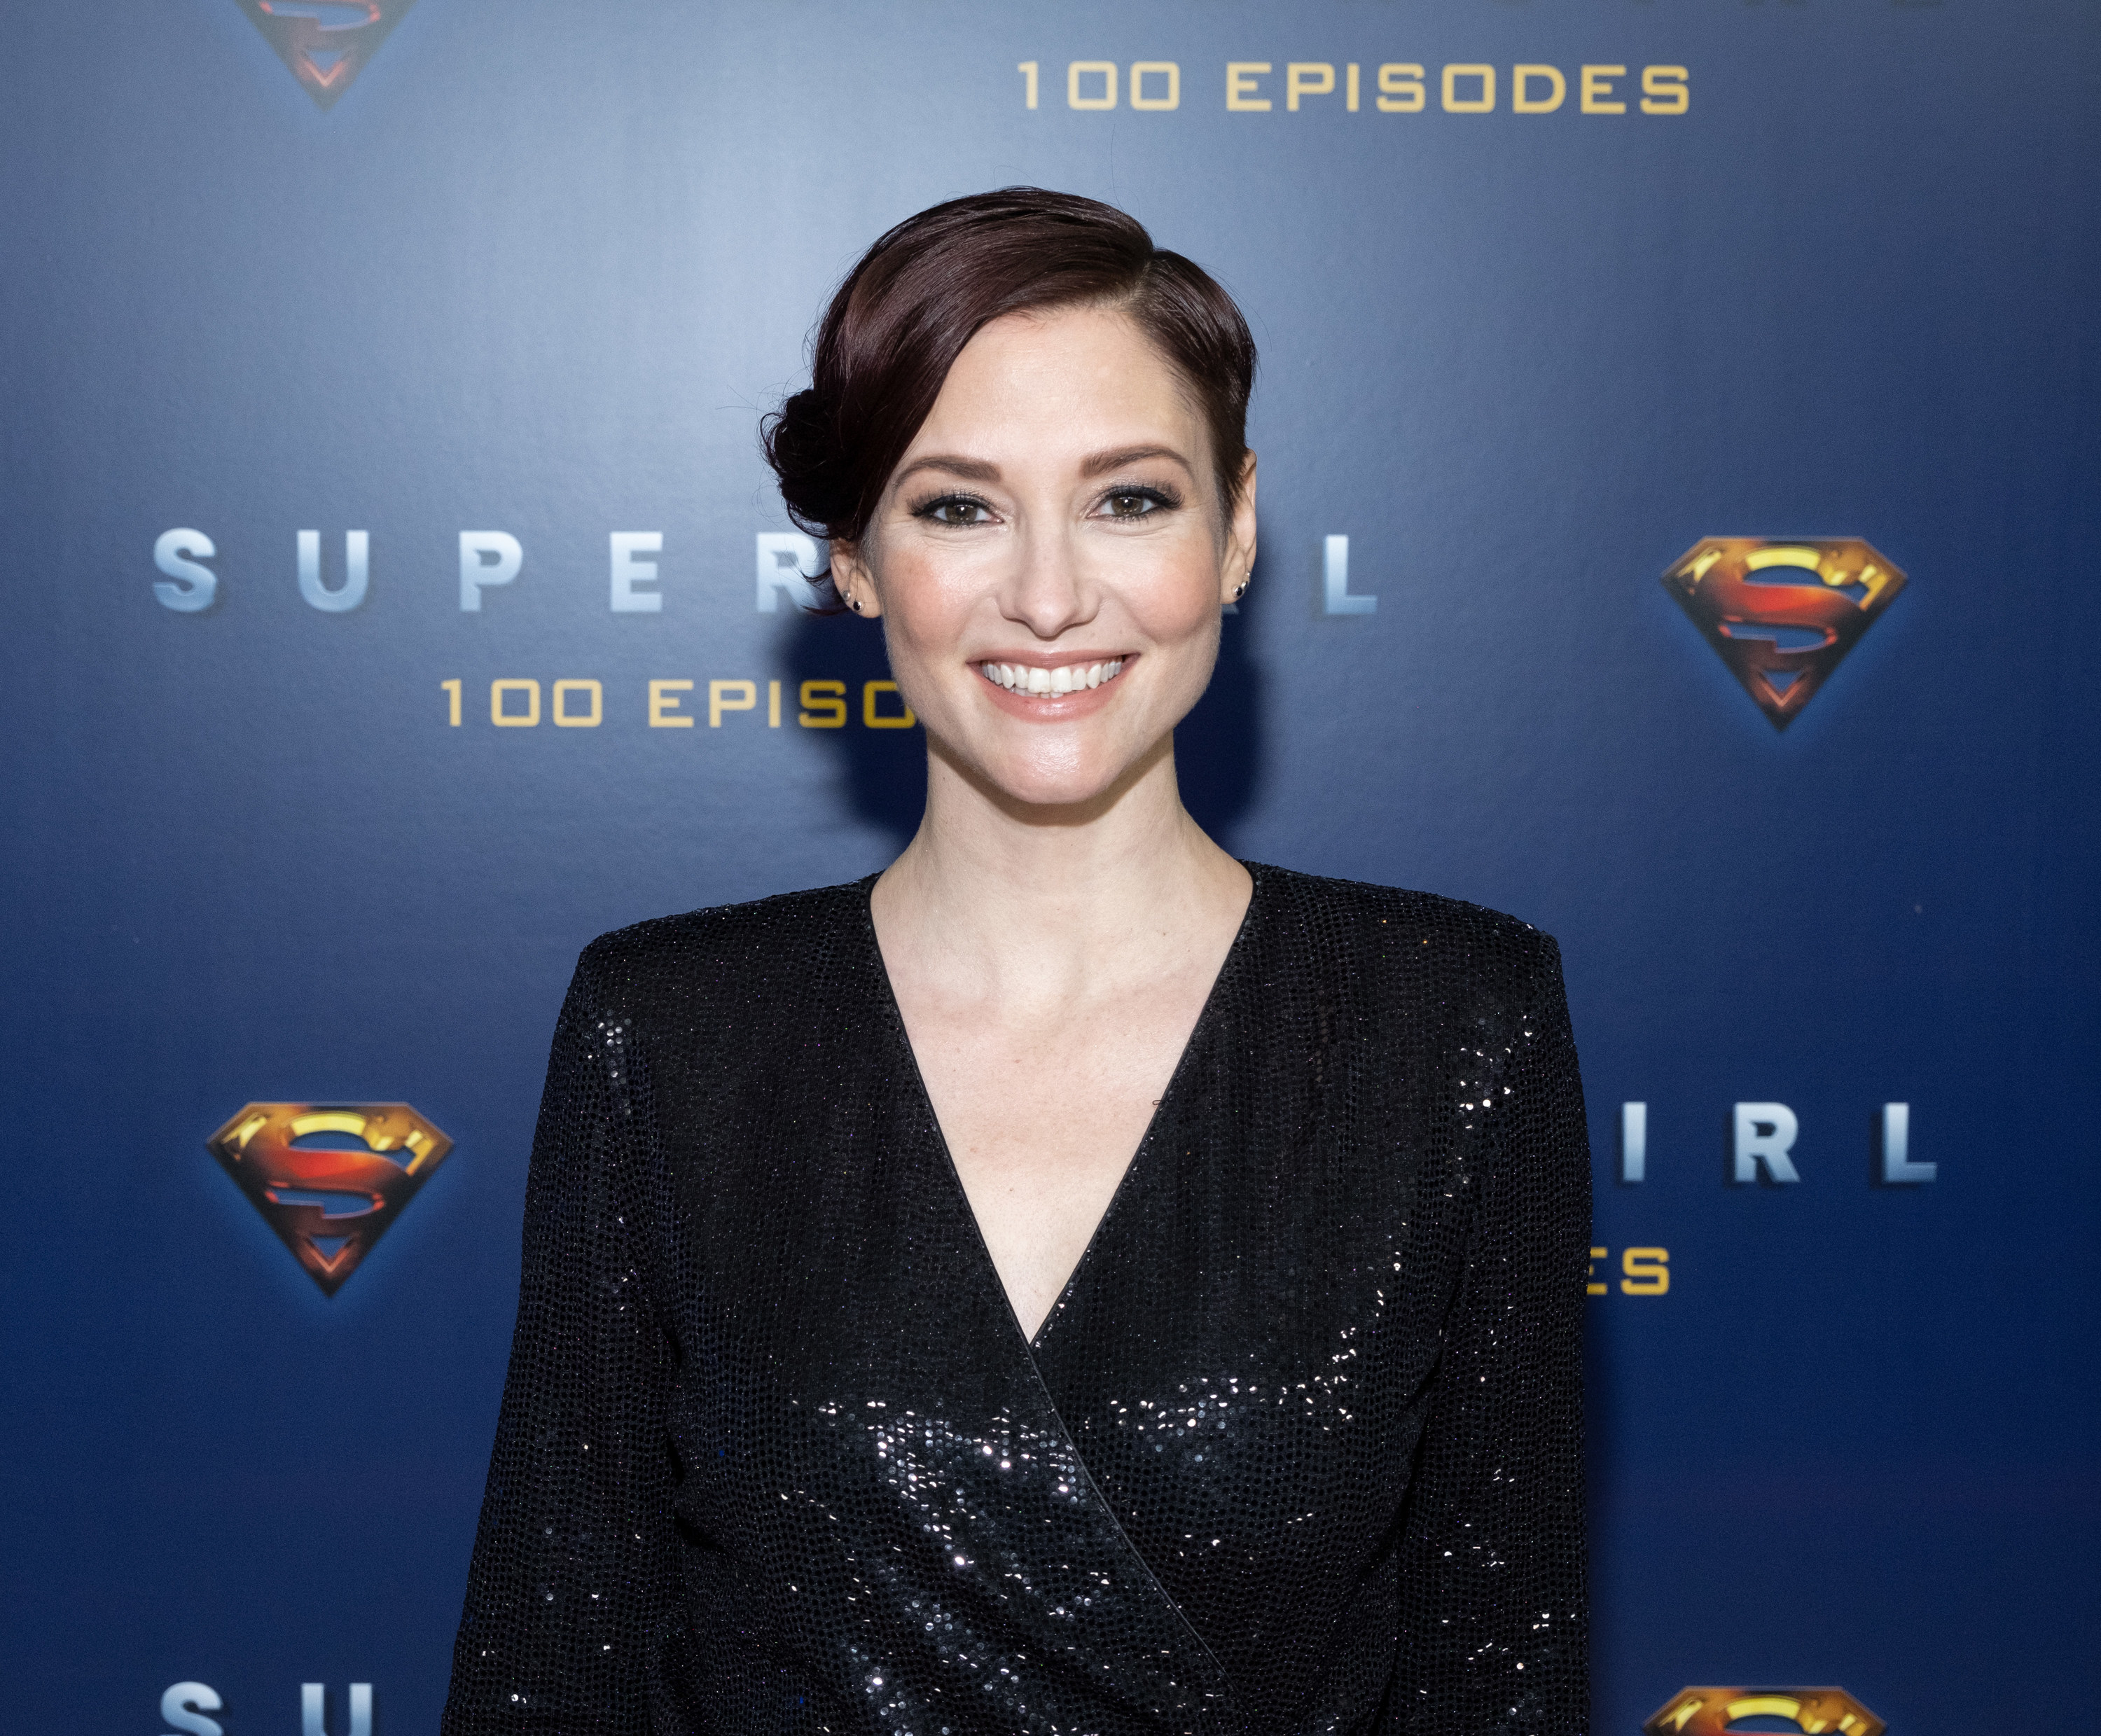 Chyler Leigh poses at a Supergirl event in a shimmery black V-neck dress